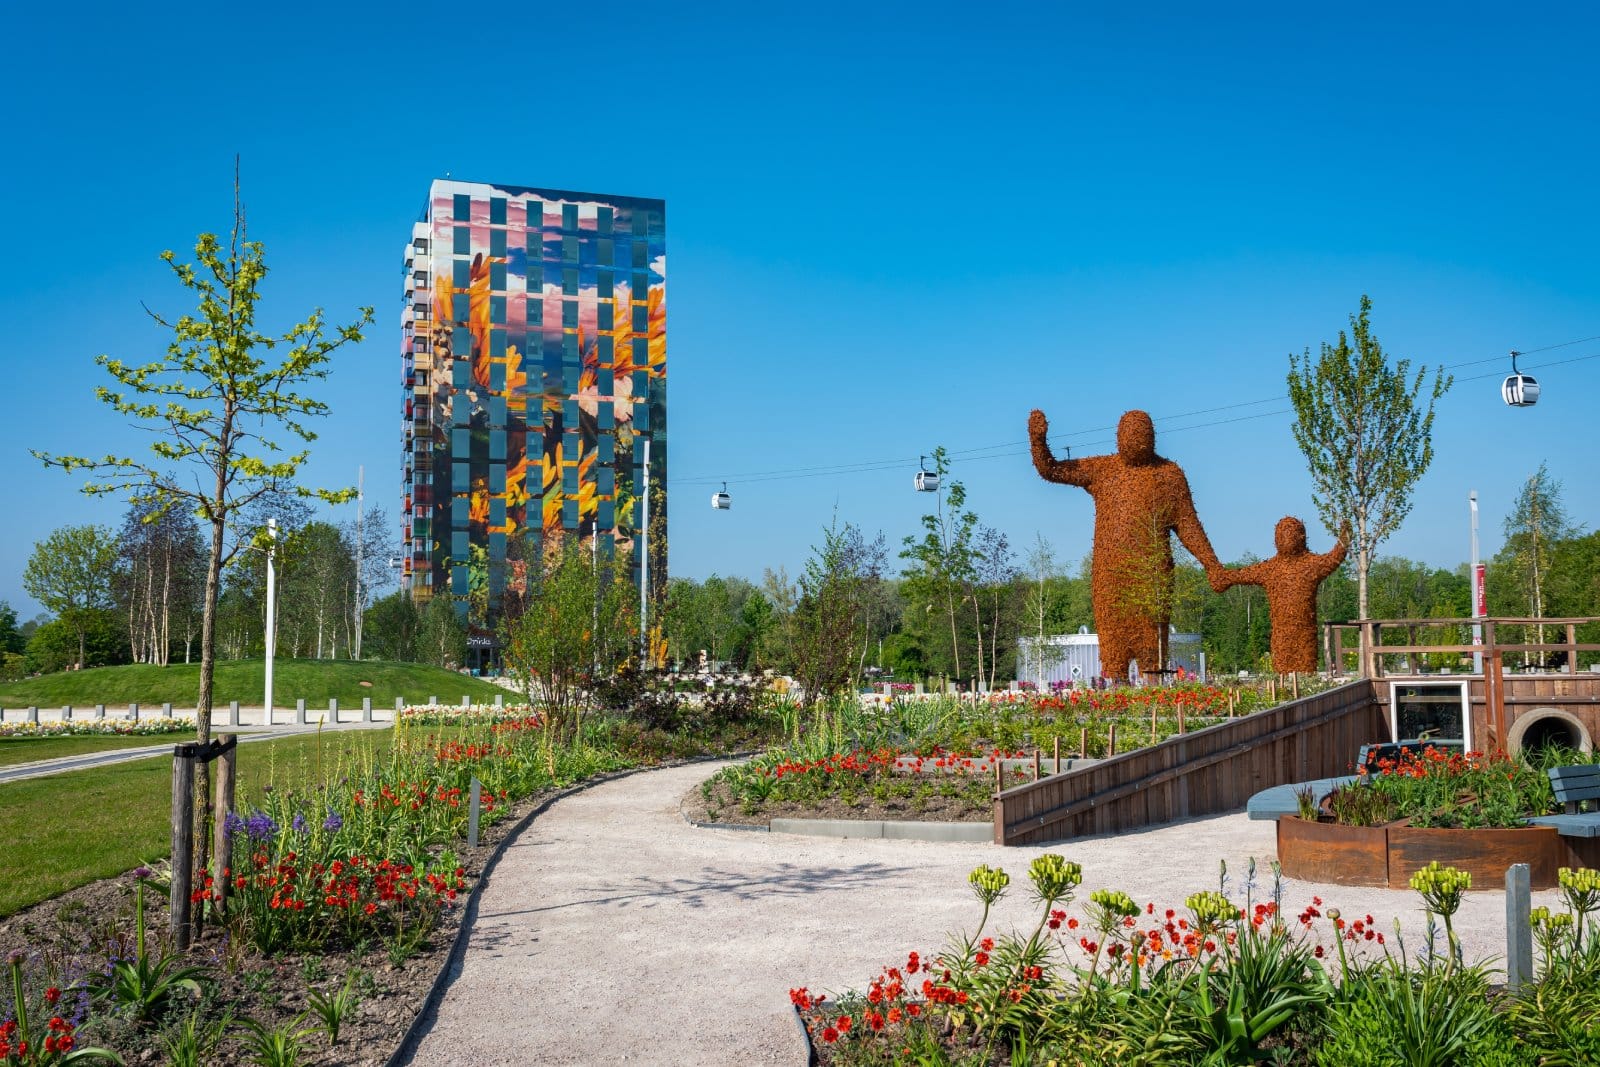 <p class="wp-caption-text">Image Credit: Shutterstock / Milos Ruzicka</p>  <p><span>Held once every ten years, the Floriade Expo is a world horticultural exhibition showcasing innovative gardening designs, sustainability projects, and a vast array of flowers. The next expo is in Almere and features themed zones.</span></p> <p><b>Insider’s Tip: </b><span>Dedicate a full day to explore all the expo has to offer.</span></p> <p><b>When to Travel: </b><span>April to October, decennially</span></p> <p><b>How to Get There: </b><span>Almere is accessible by train from Amsterdam. The expo site is close to Almere Centrum station.</span></p>